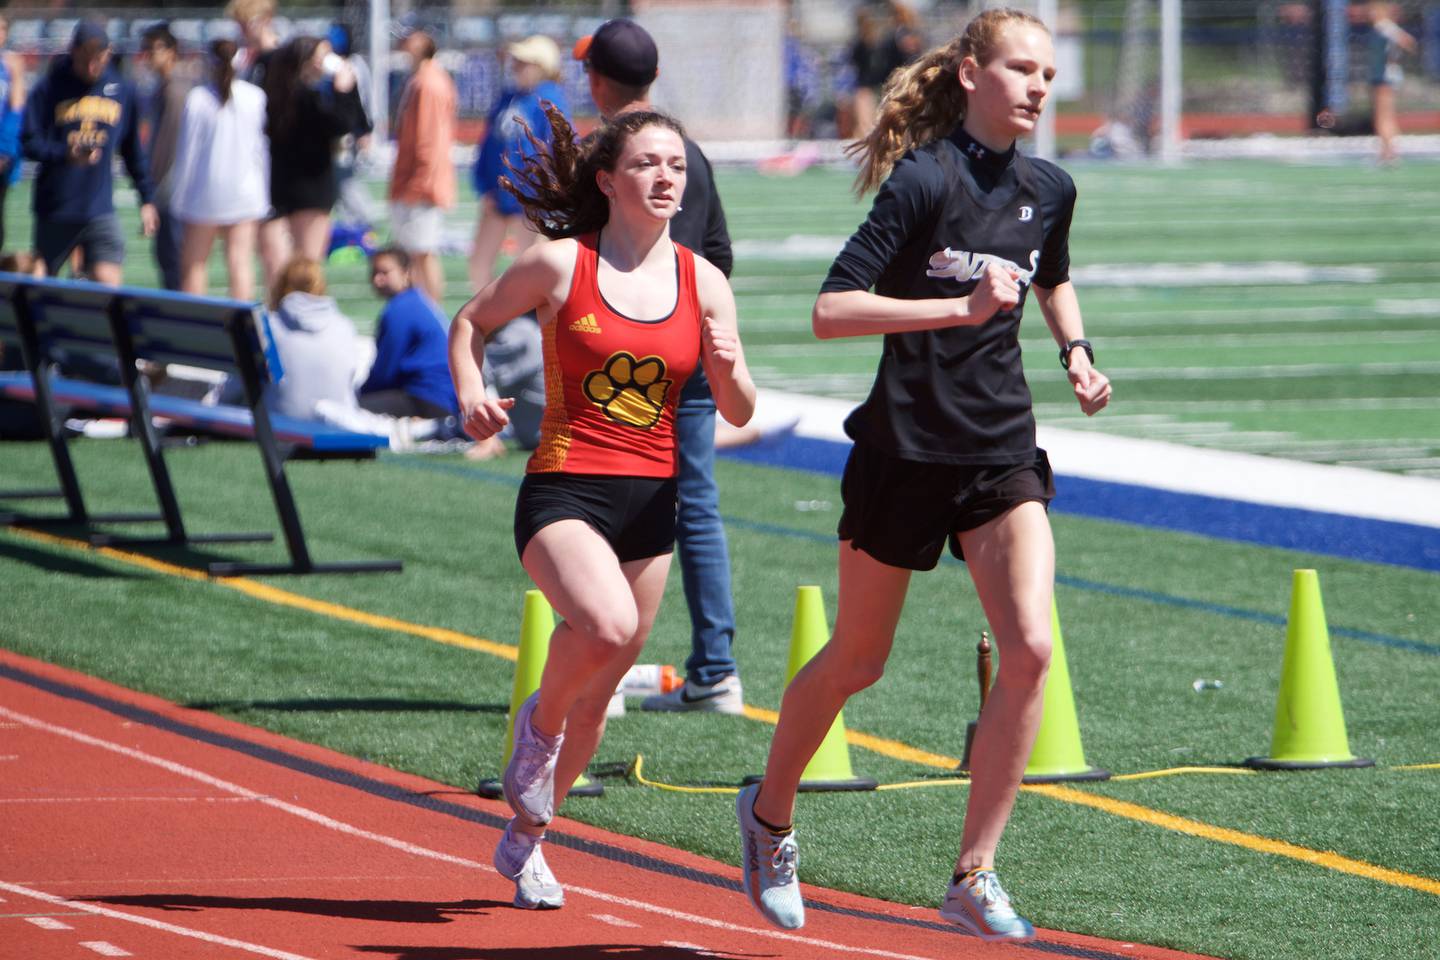 Glenbard North's Grace Schager and Batavia's Kat Schlenker compete in the 3200 meter run at the DuKane Girl's Conference meet at St. Charles North on May 7, 2022 in St. Charles.